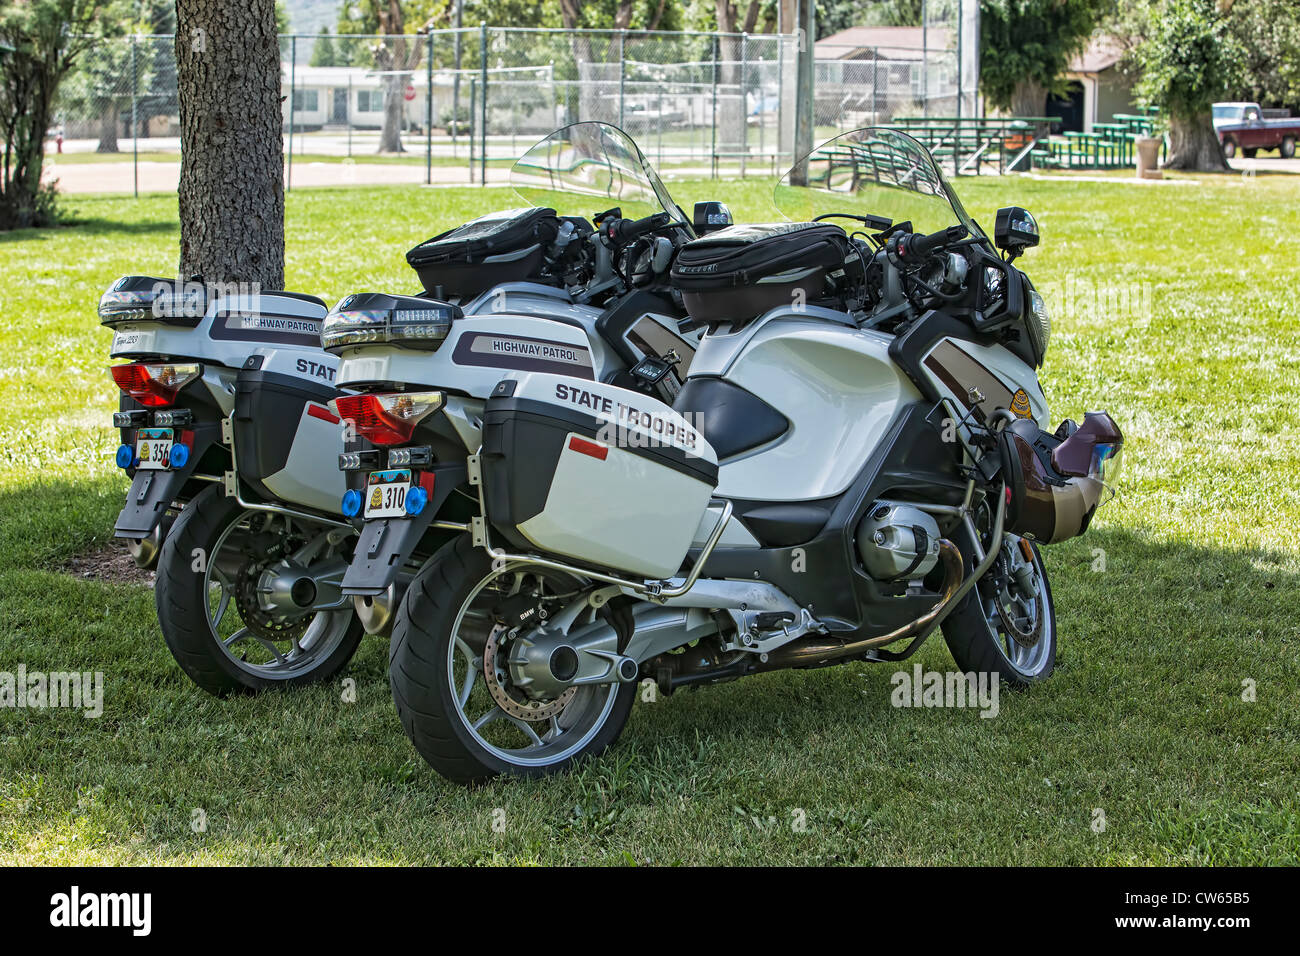 Two State Trooper motorcycles parked under a tree in a city park, used as escorts for a car show. Stock Photo